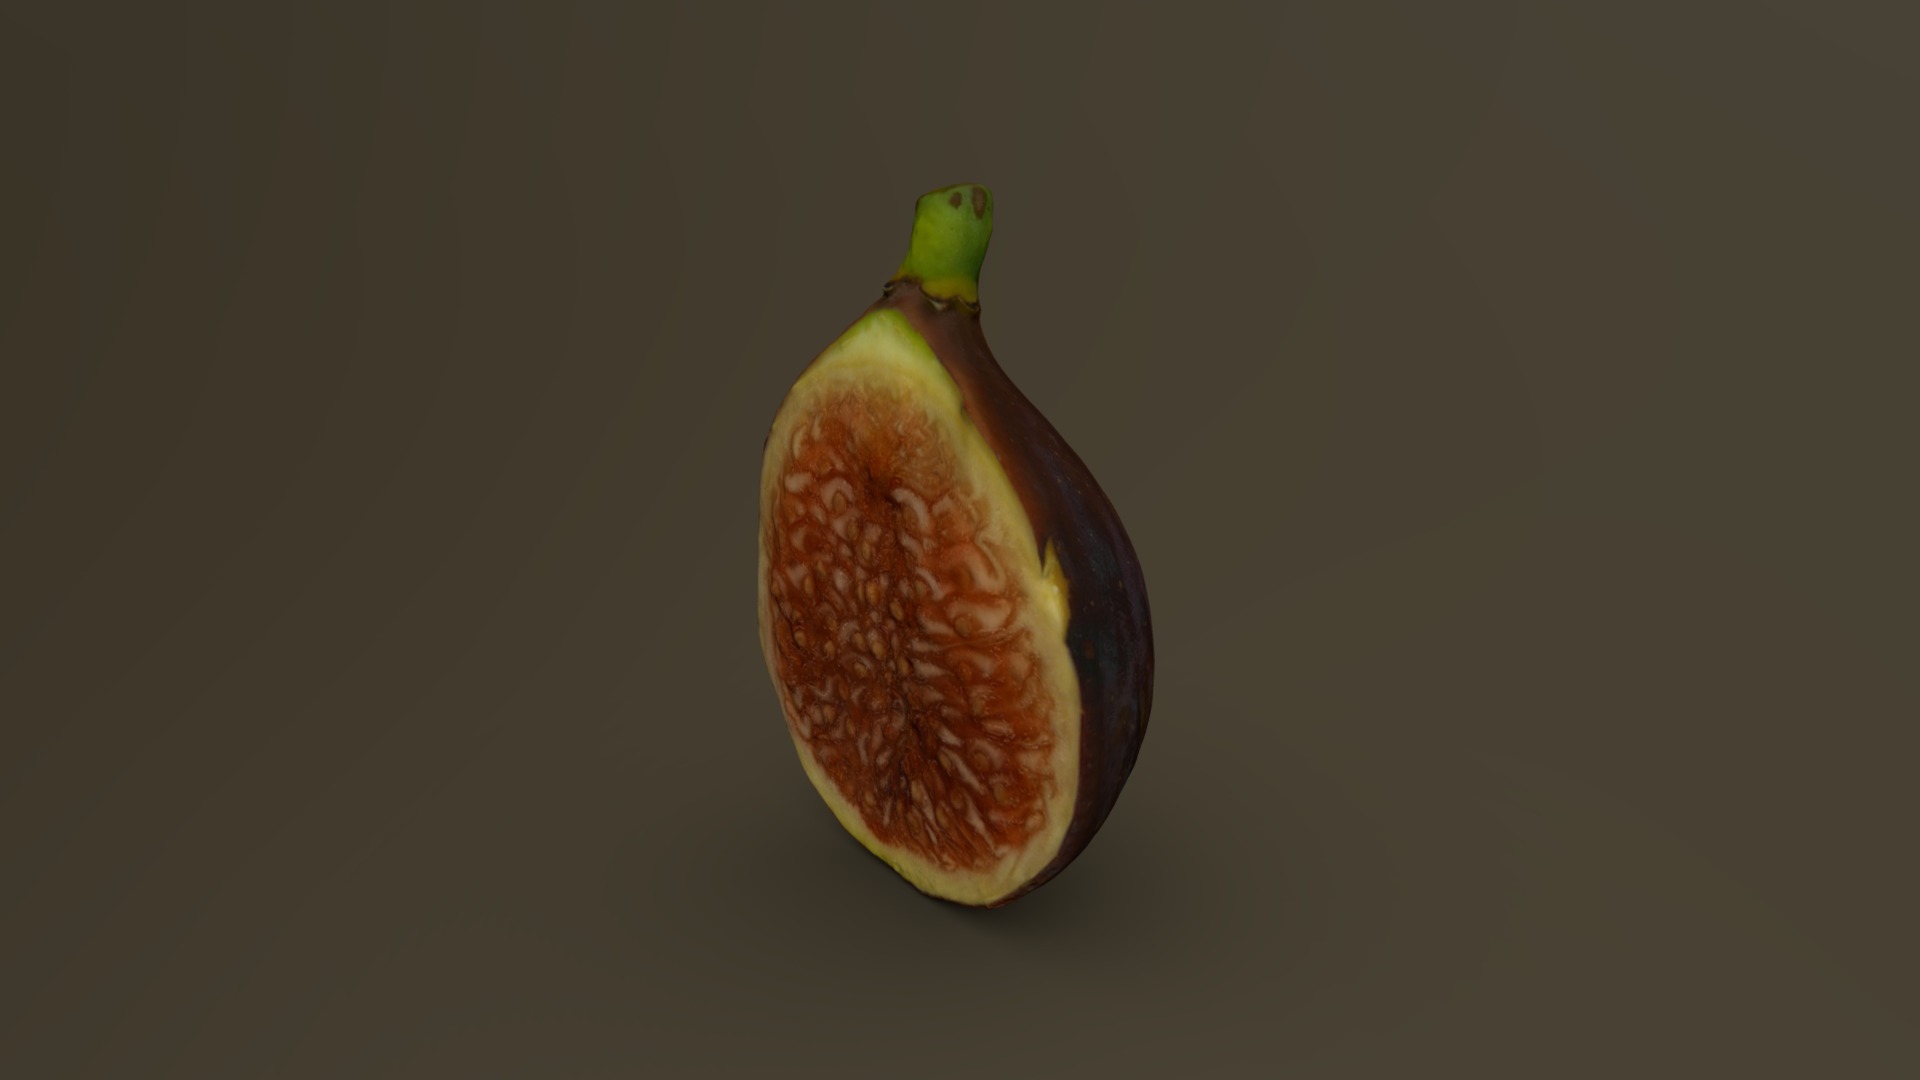 3D model Black Fig Cut in Half 06 - This is a 3D model of the Black Fig Cut in Half 06. The 3D model is about a pear with a green stem.